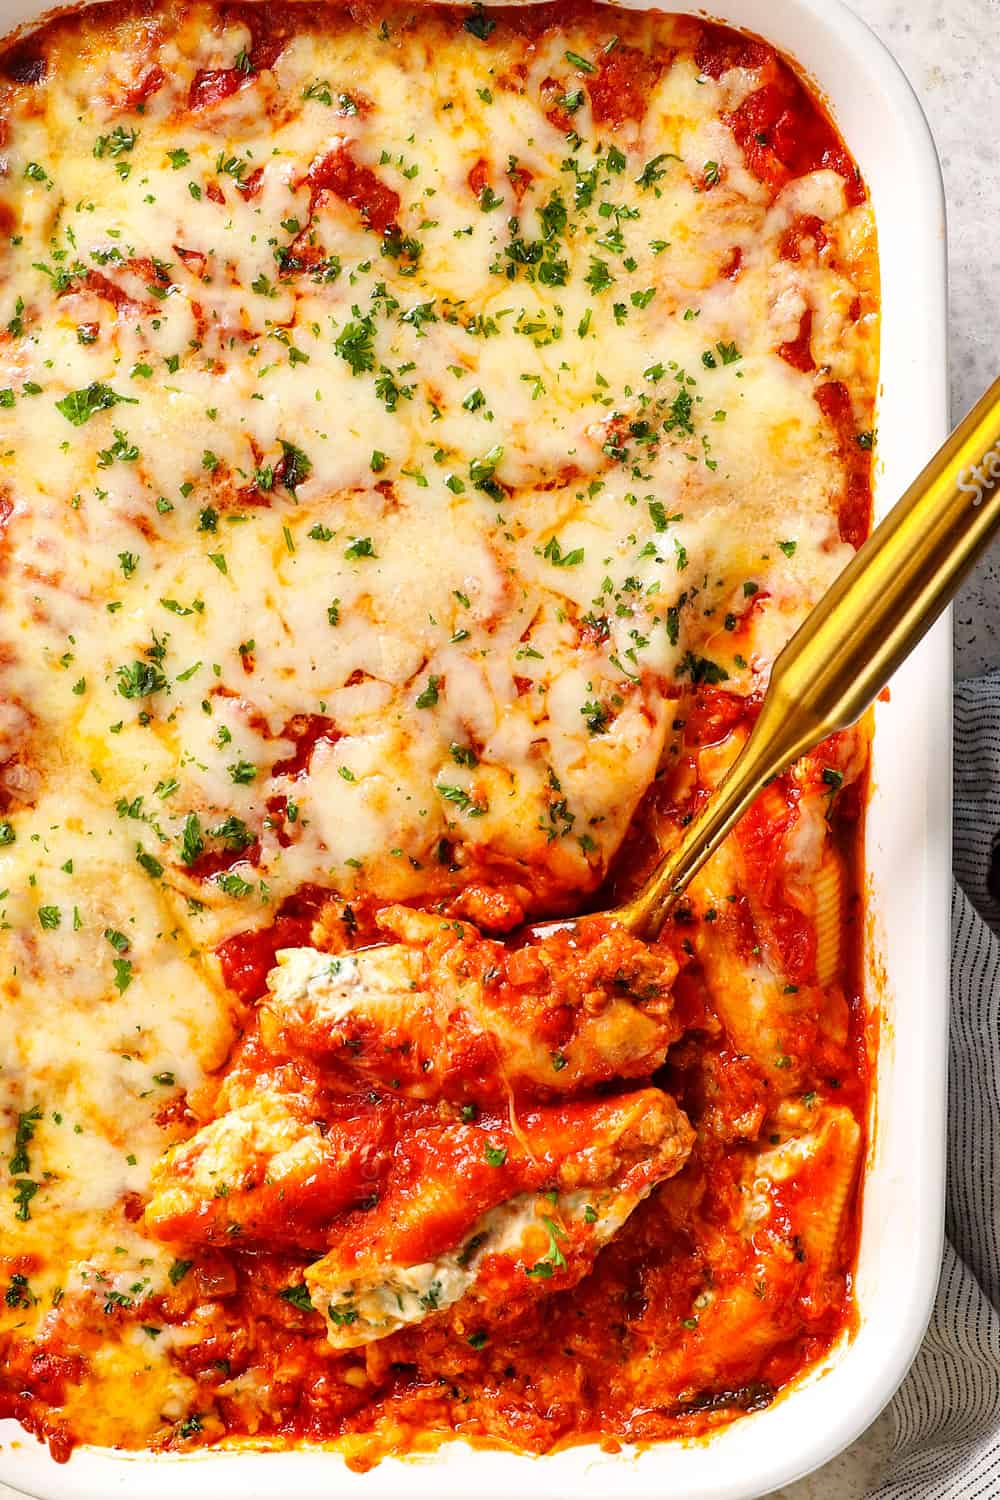 top view of a spoonful of stuffed shells baked in a 9x13 baking dish